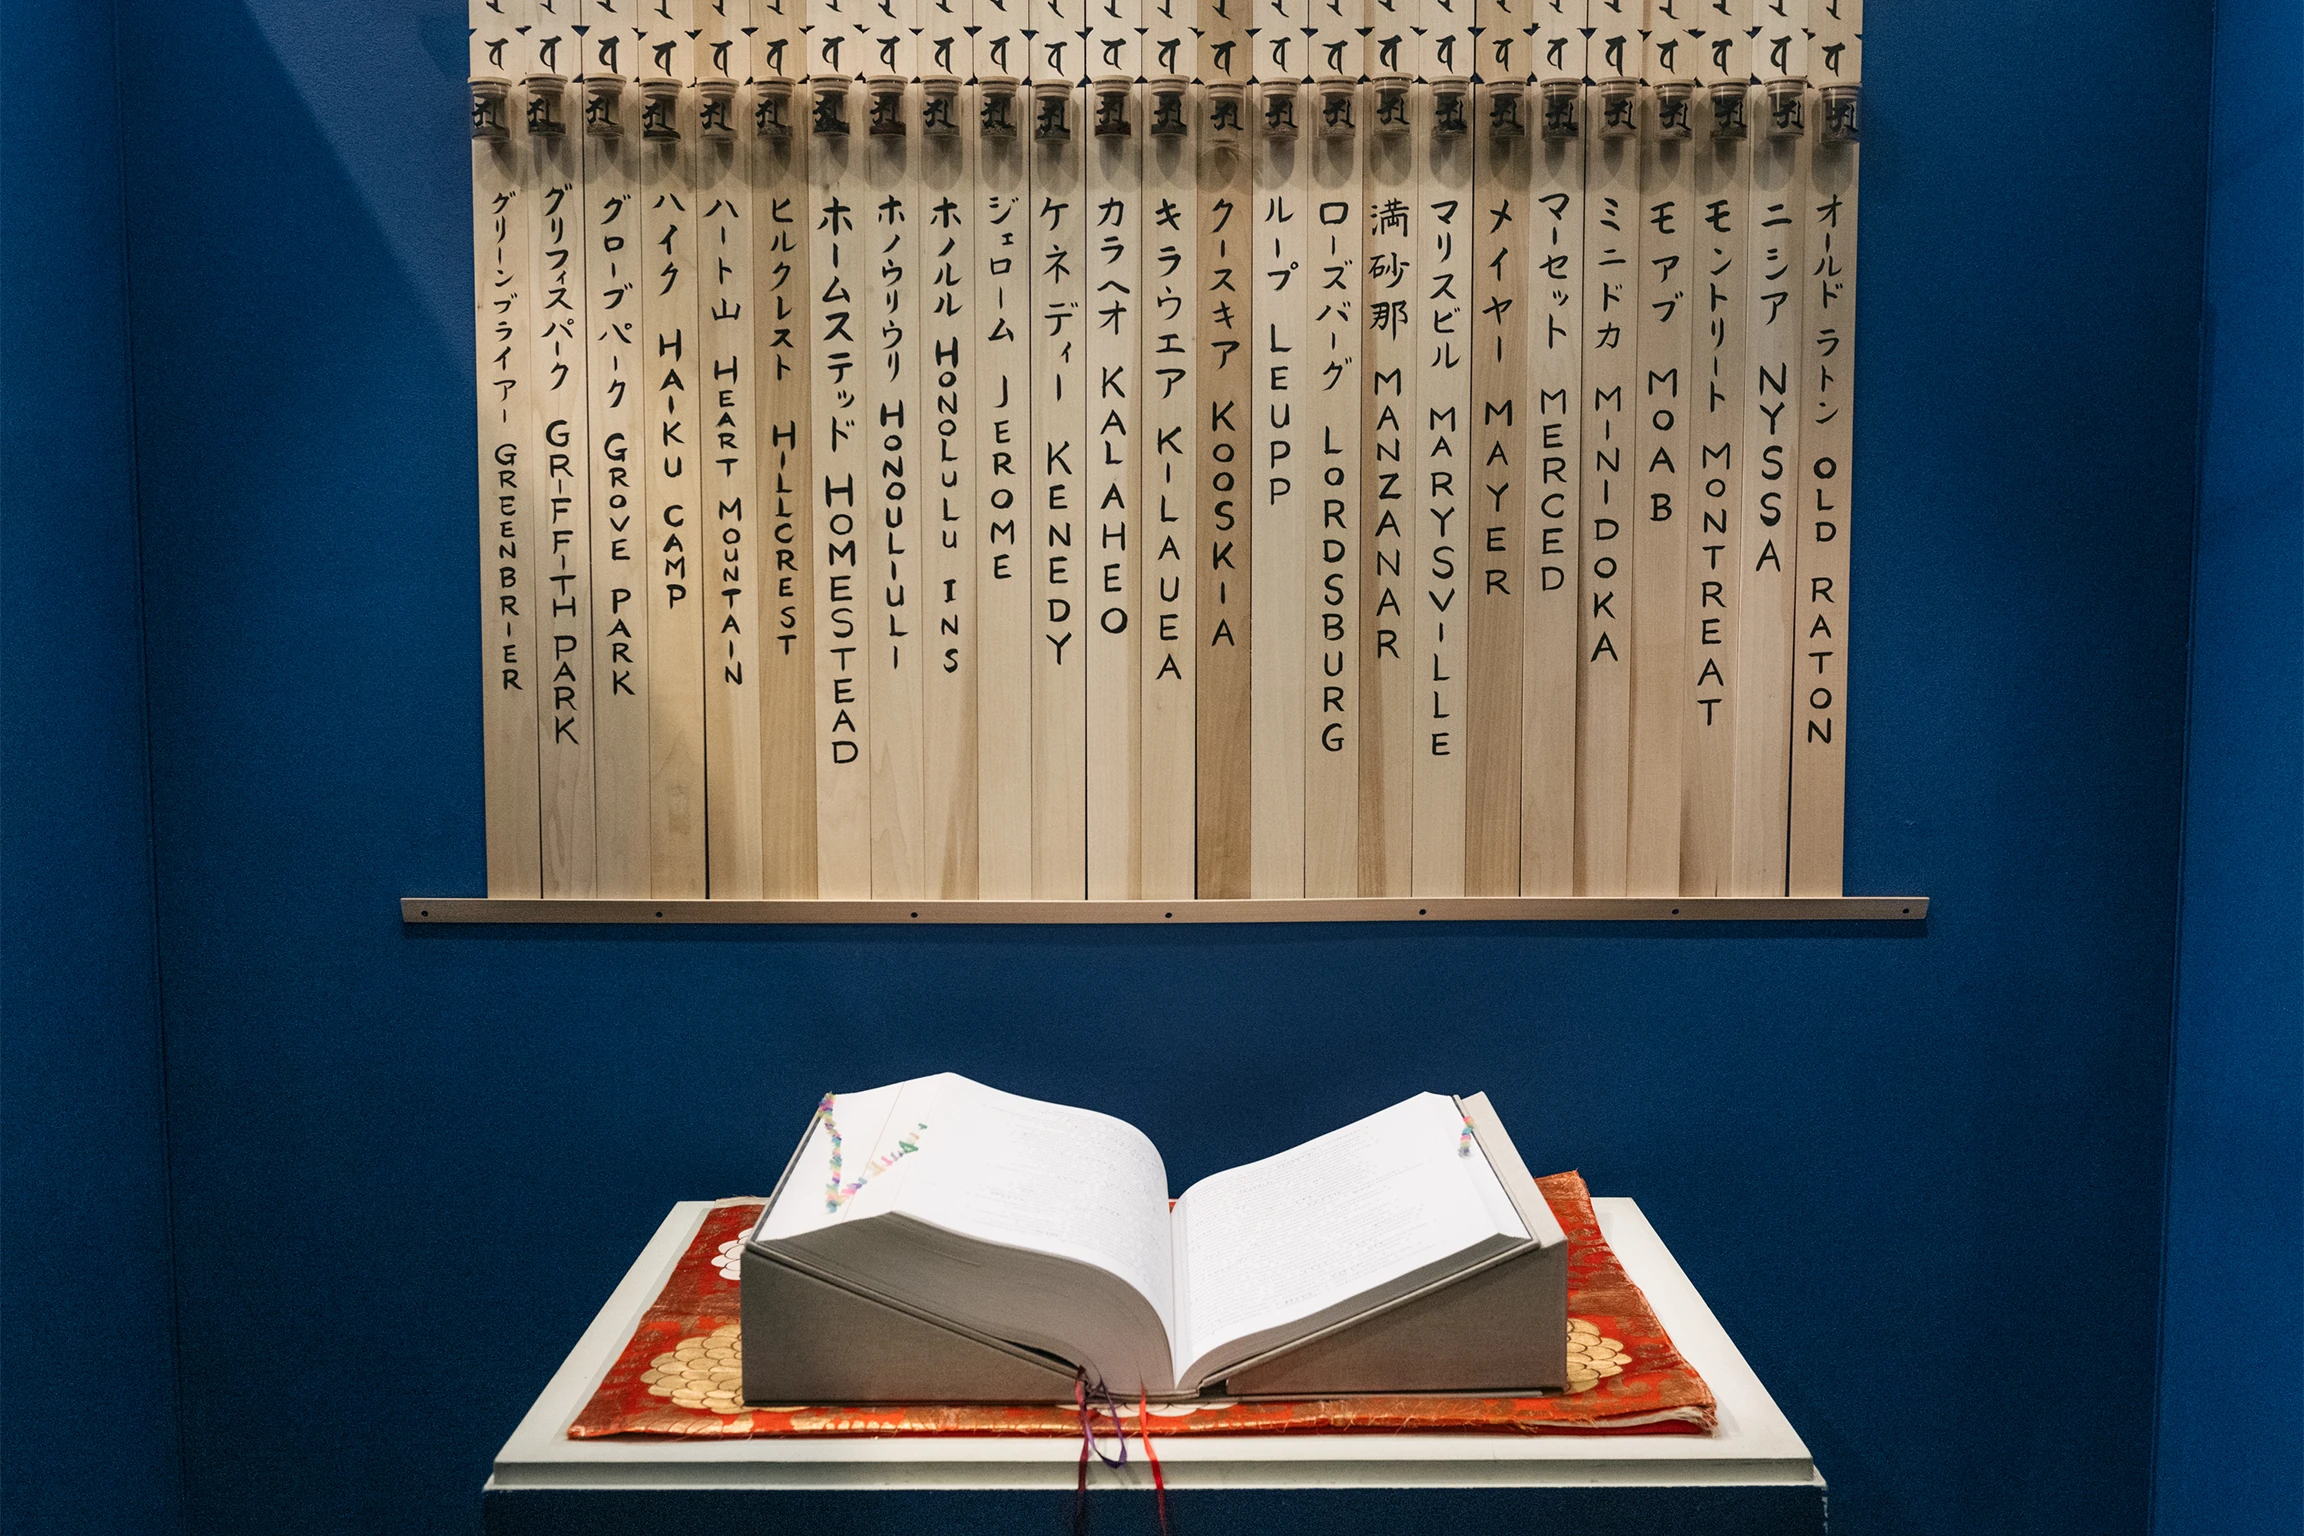 A book sits open on a table in front of a navy blue wall with Japanese writing written on wooden planks